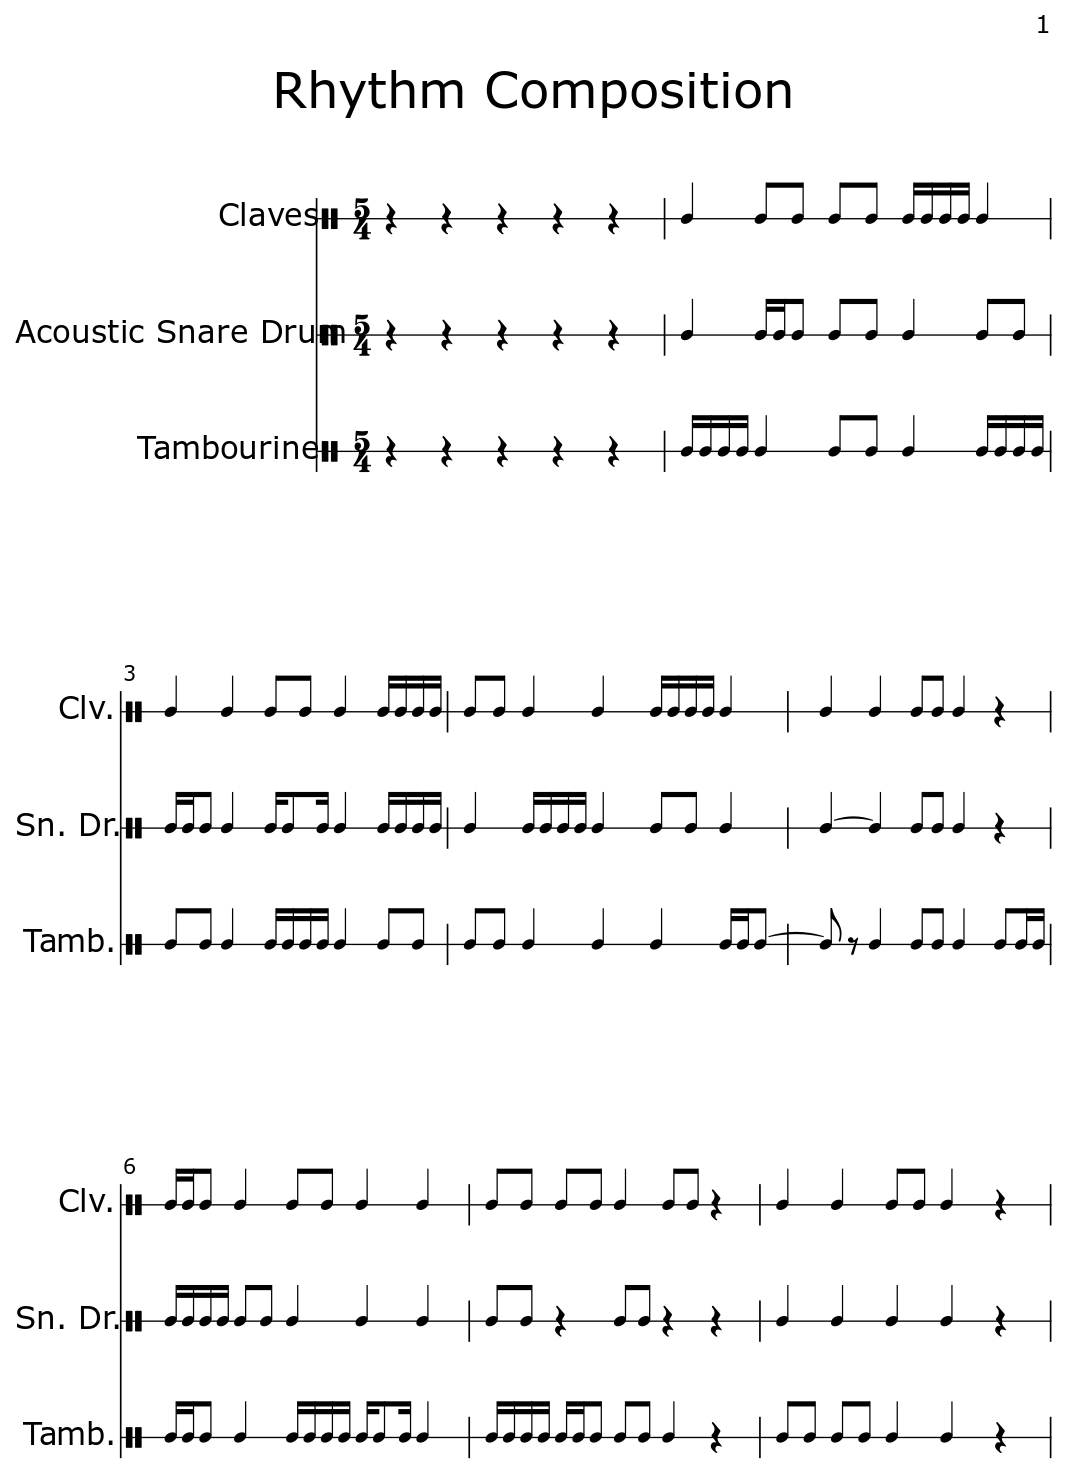 Rhythm Composition - Sheet music for Claves, Acoustic Snare Drum ...